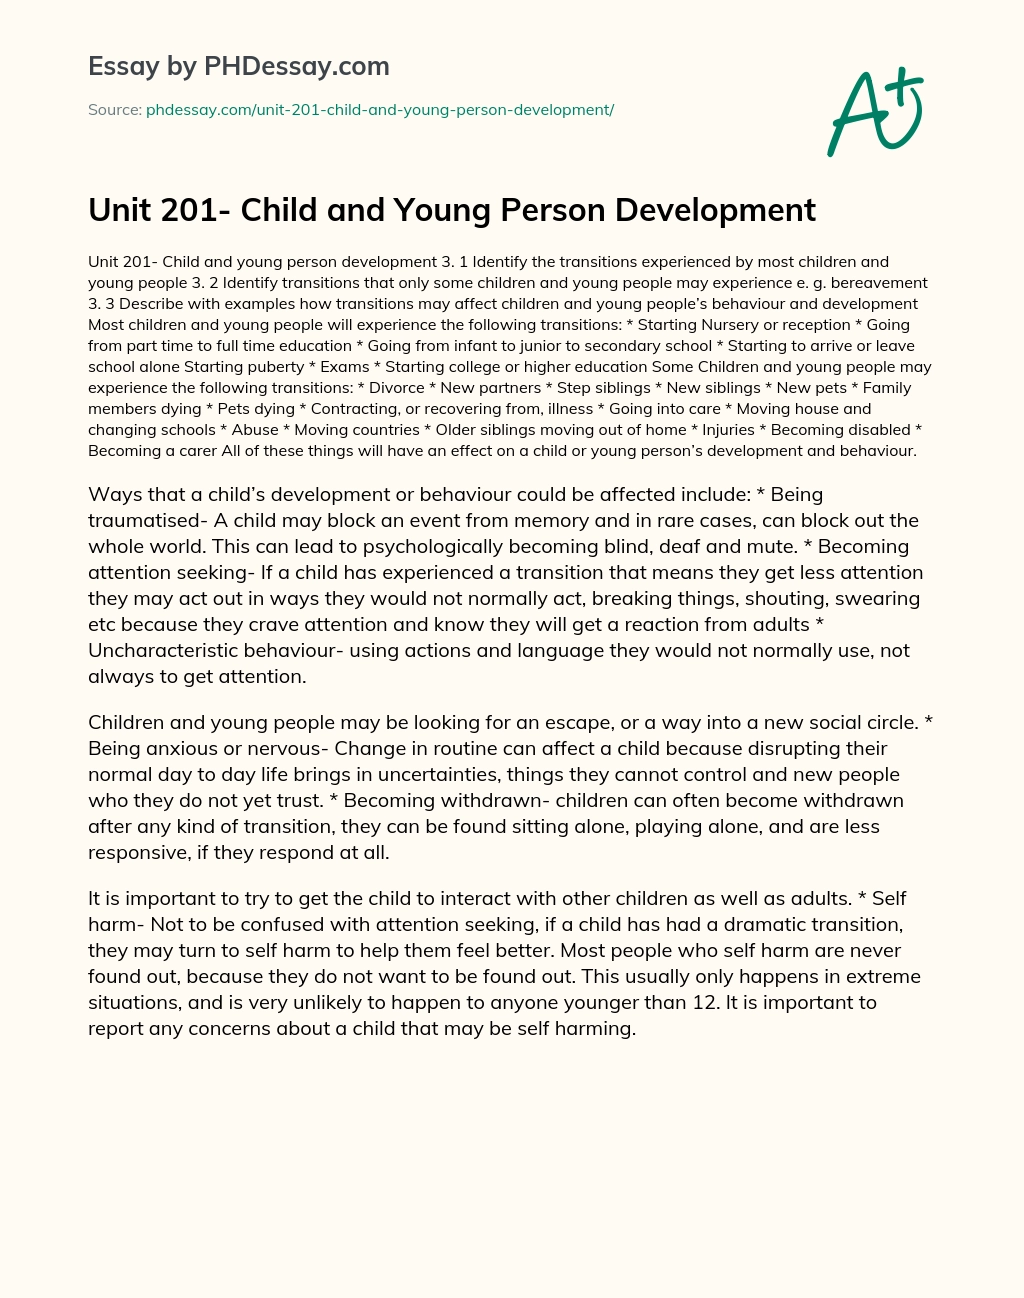 Unit 201- Child and Young Person Development essay